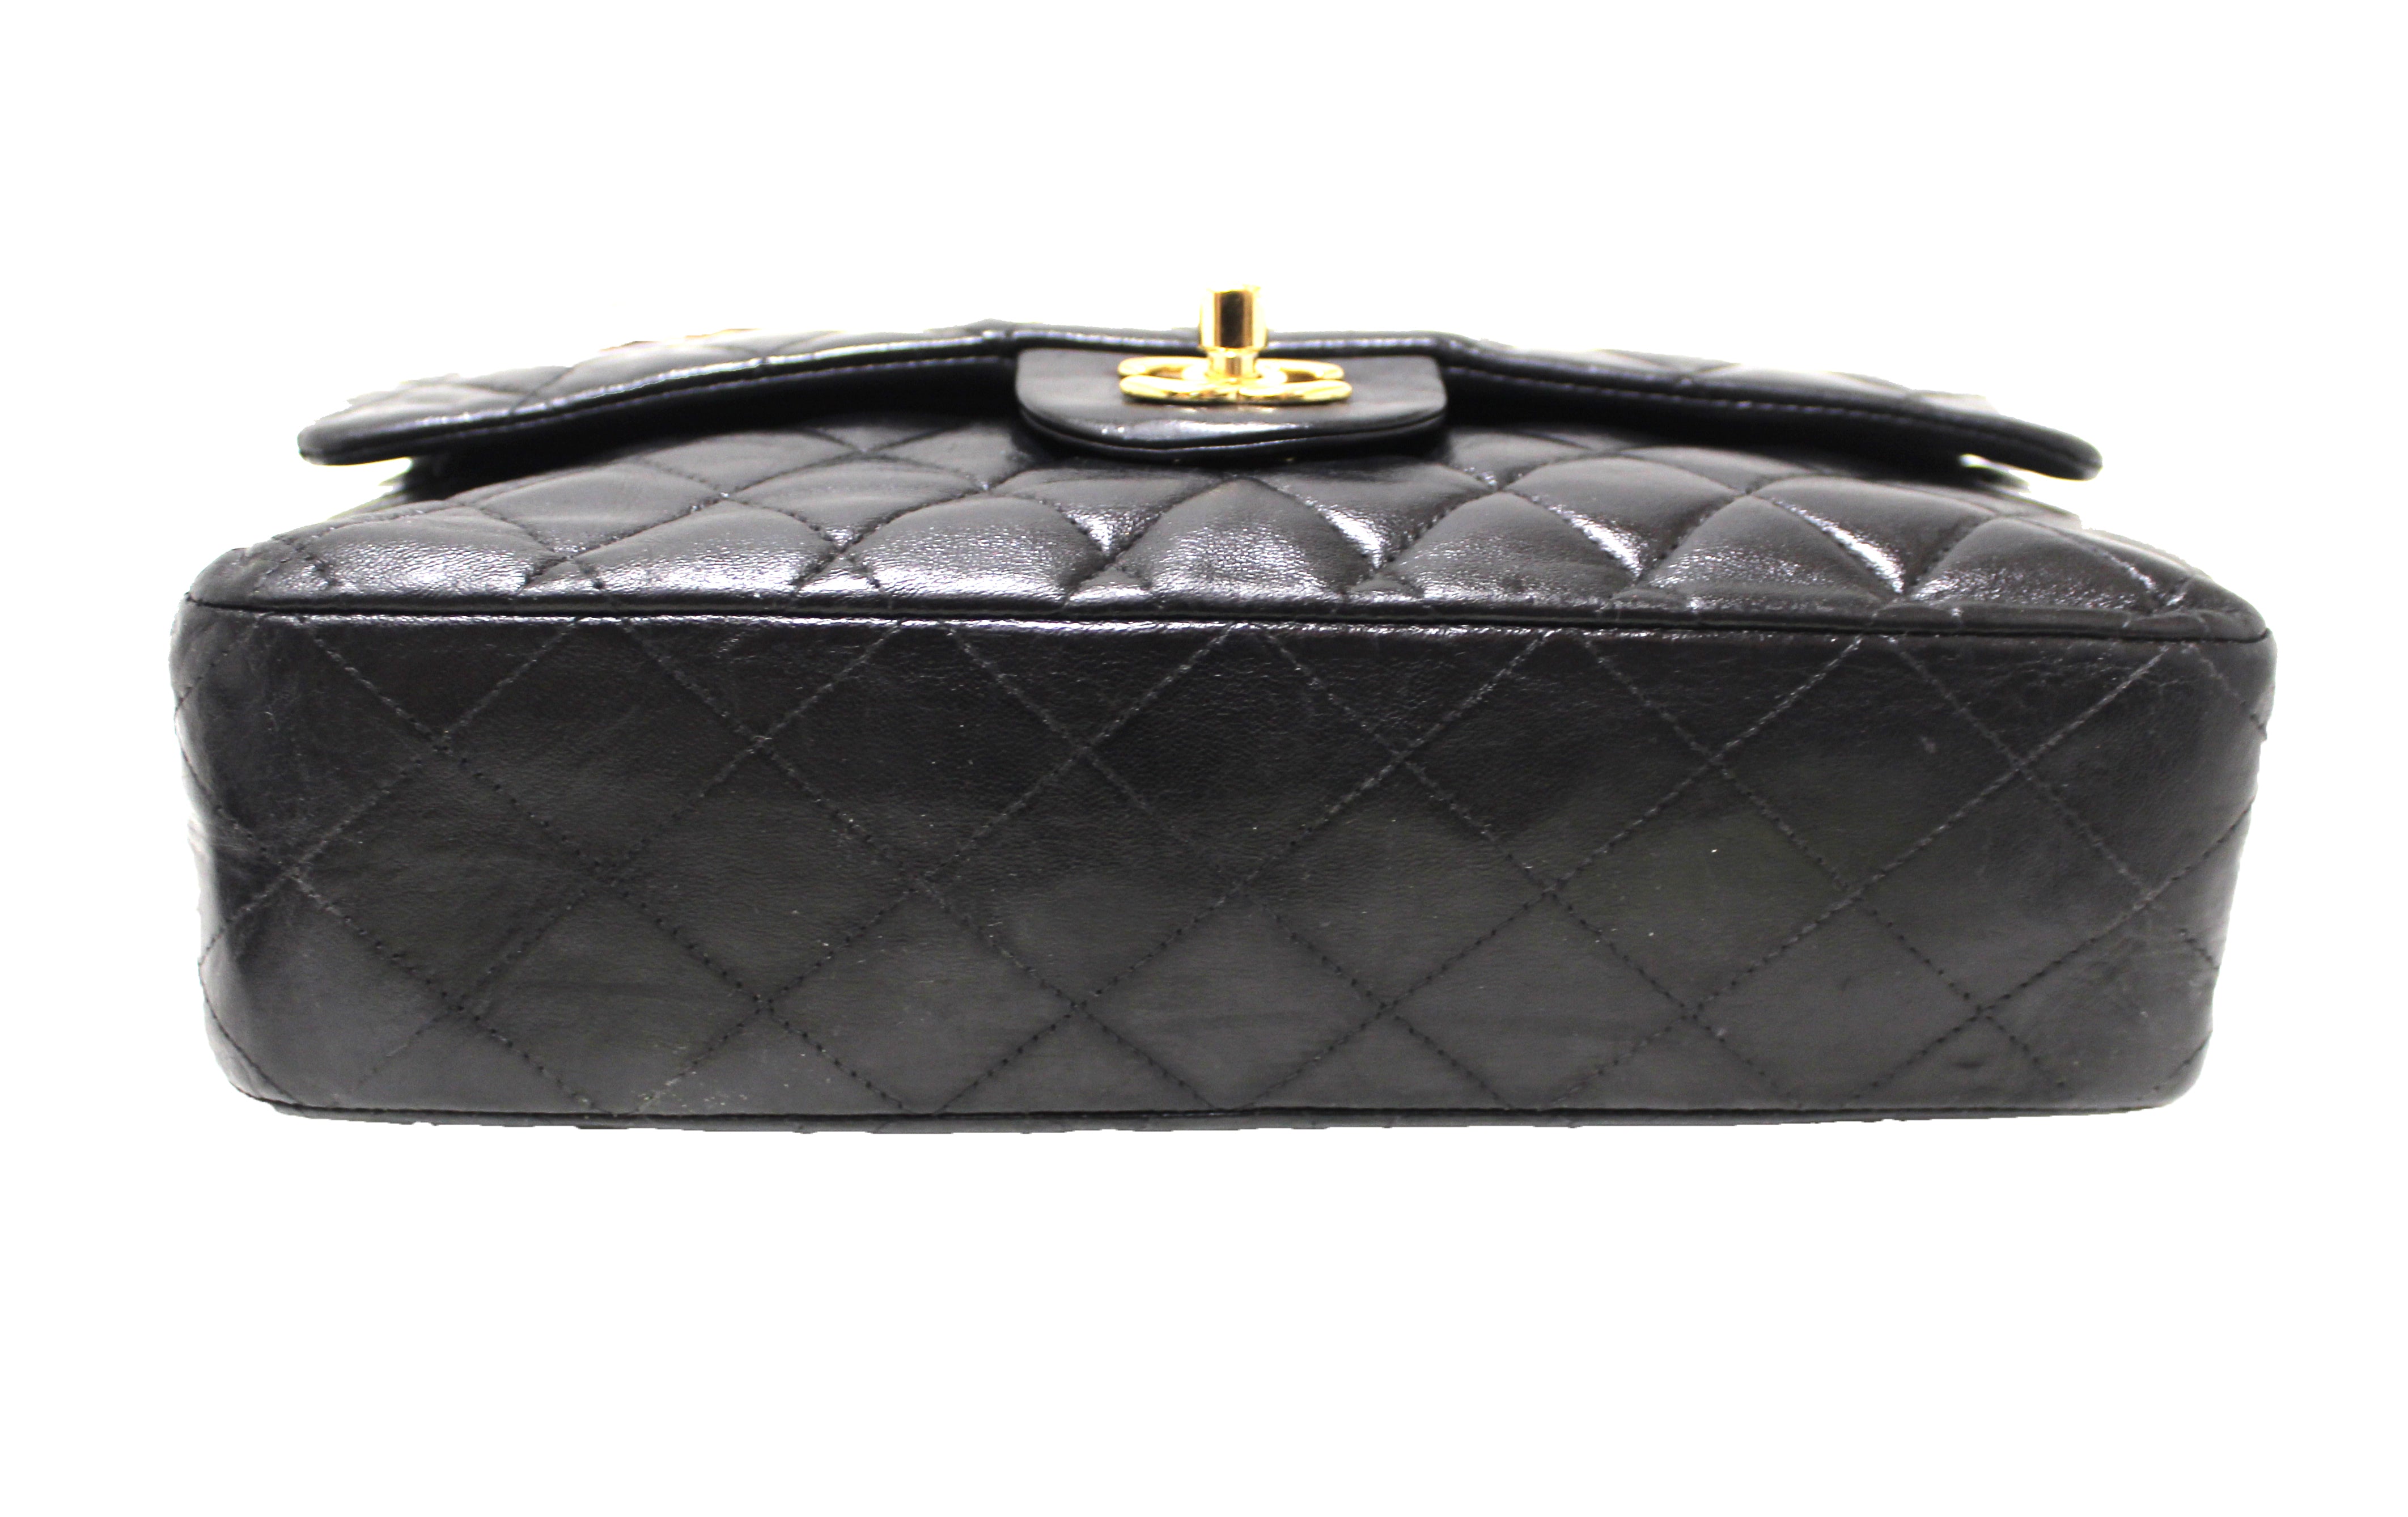 Authentic Chanel Quilted Black Lambskin Leather Classic Medium Flap Bag